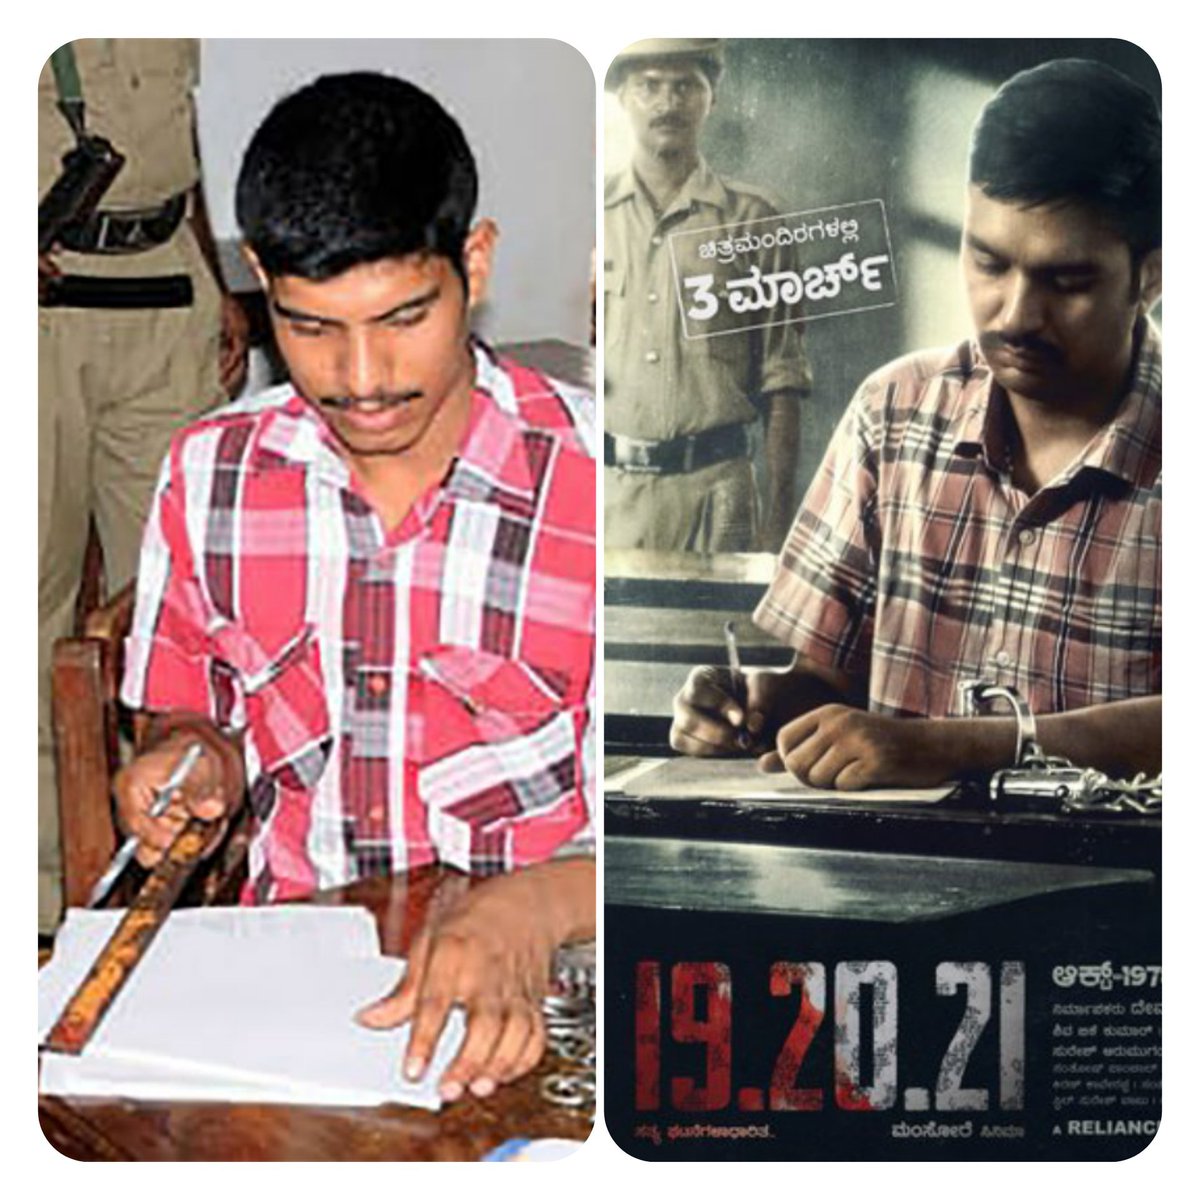 Watched #Film192021 today. It is probably one of the best cinema I watched on screen this year. Appreciate @mansore25 for bringing poor people struggle against corrupt system which have been trying to snatch their basic rights to live

Thanks to #DevarajPR for producing this film